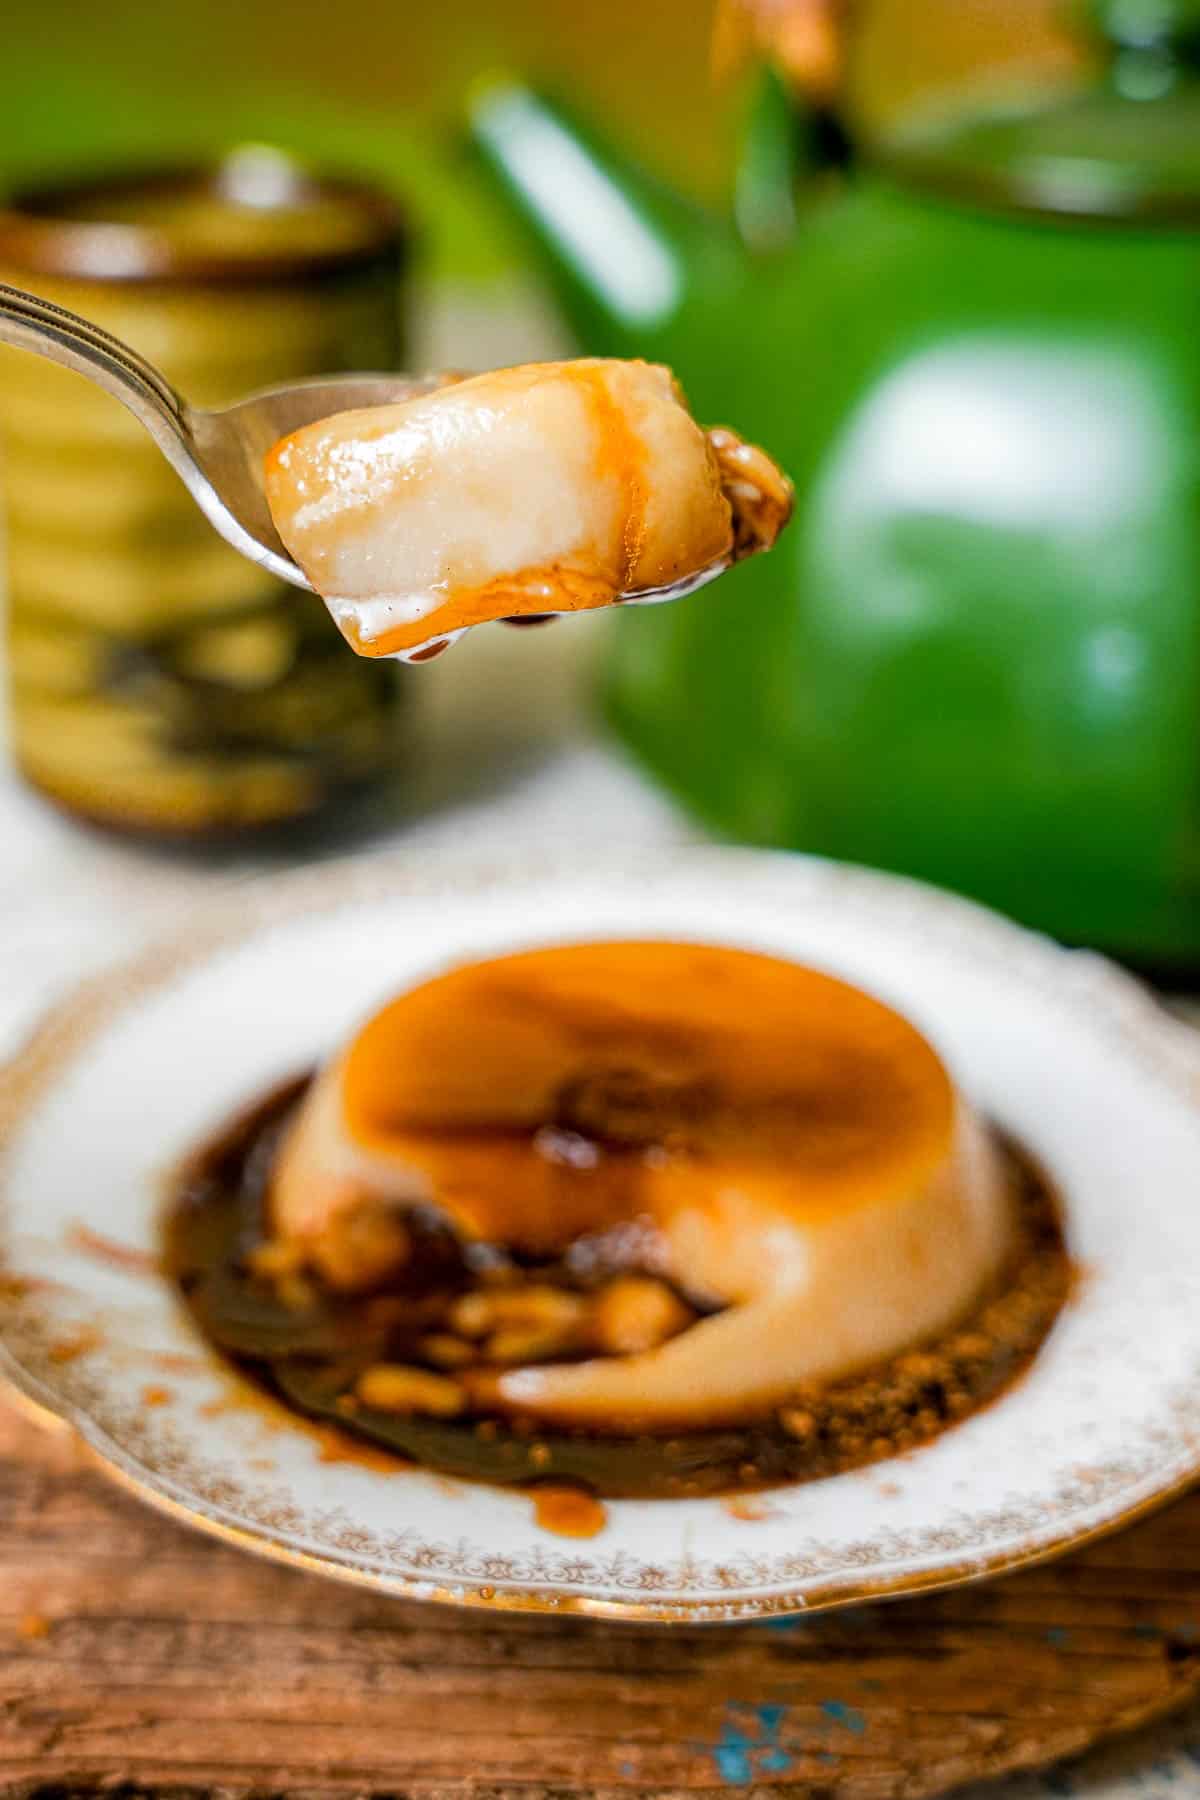 A spoonful of banh flan dripping with caramel is held over a plate with flan. A tea pot and glass can be seen in the background.